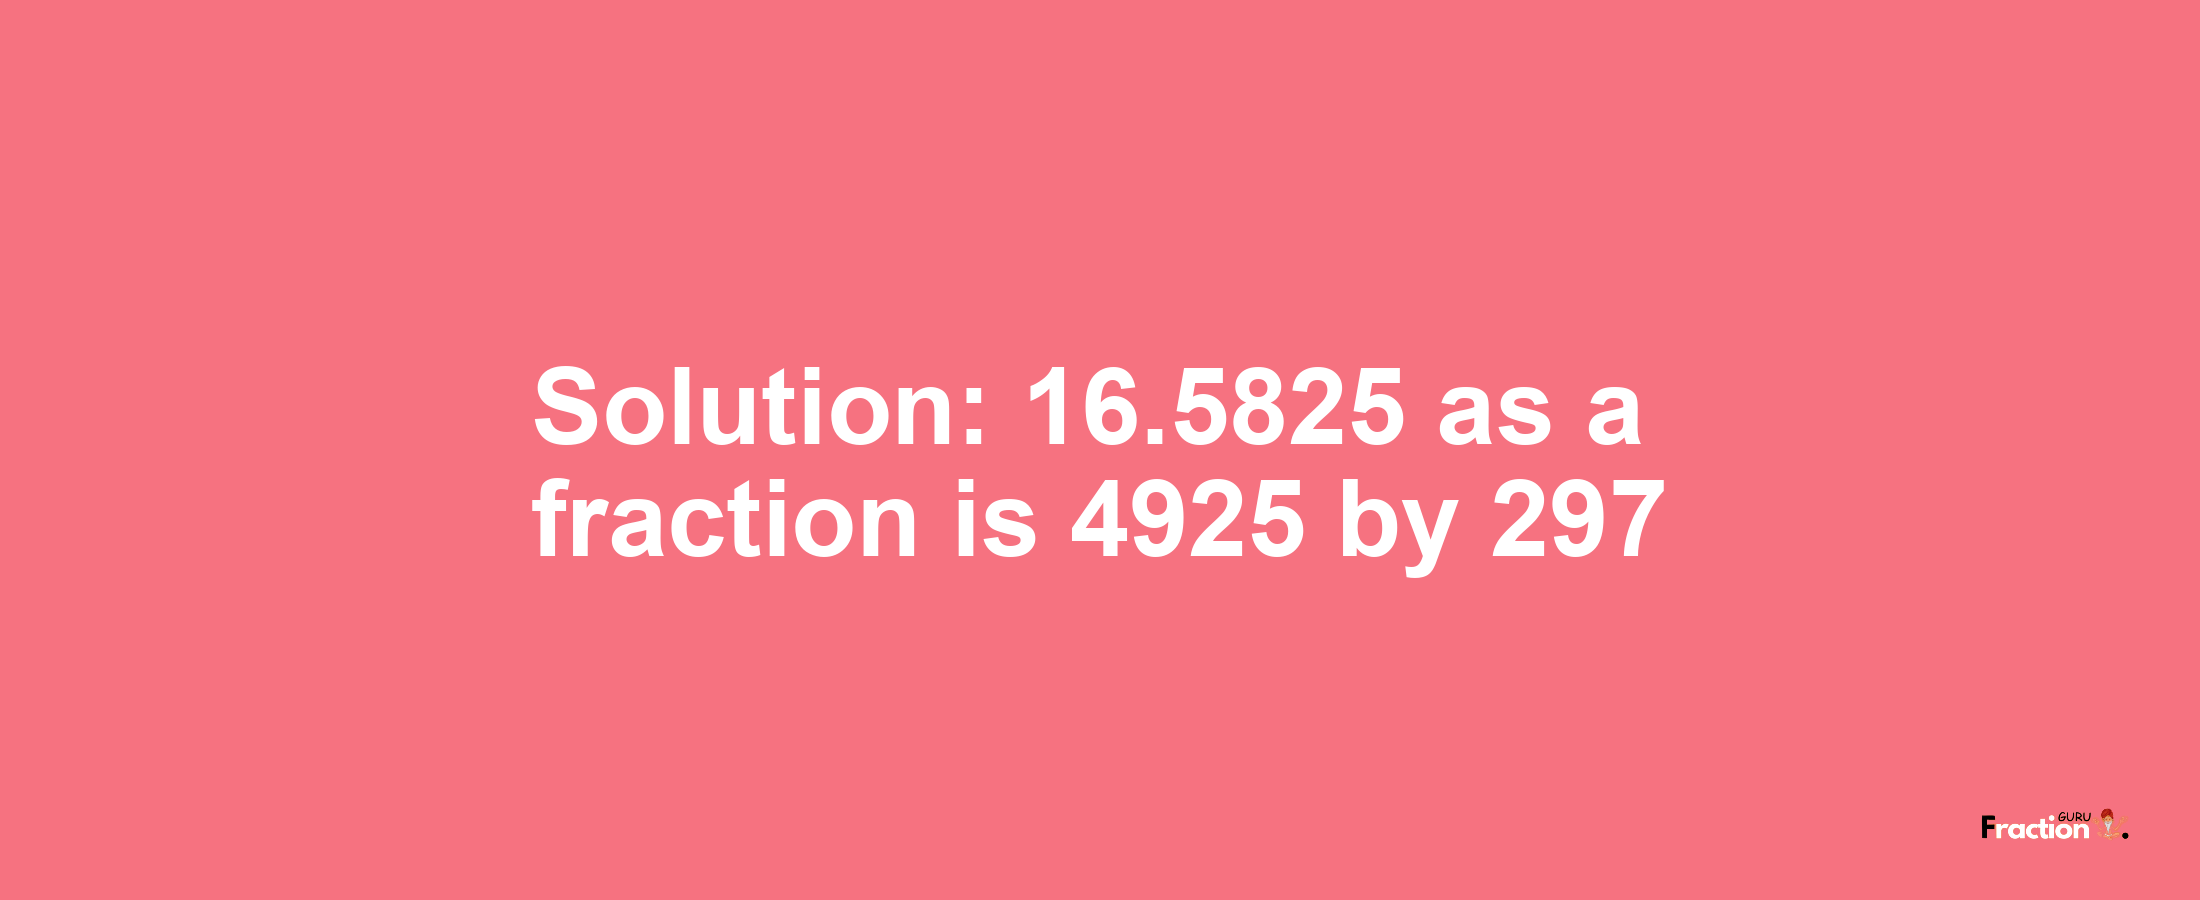 Solution:16.5825 as a fraction is 4925/297